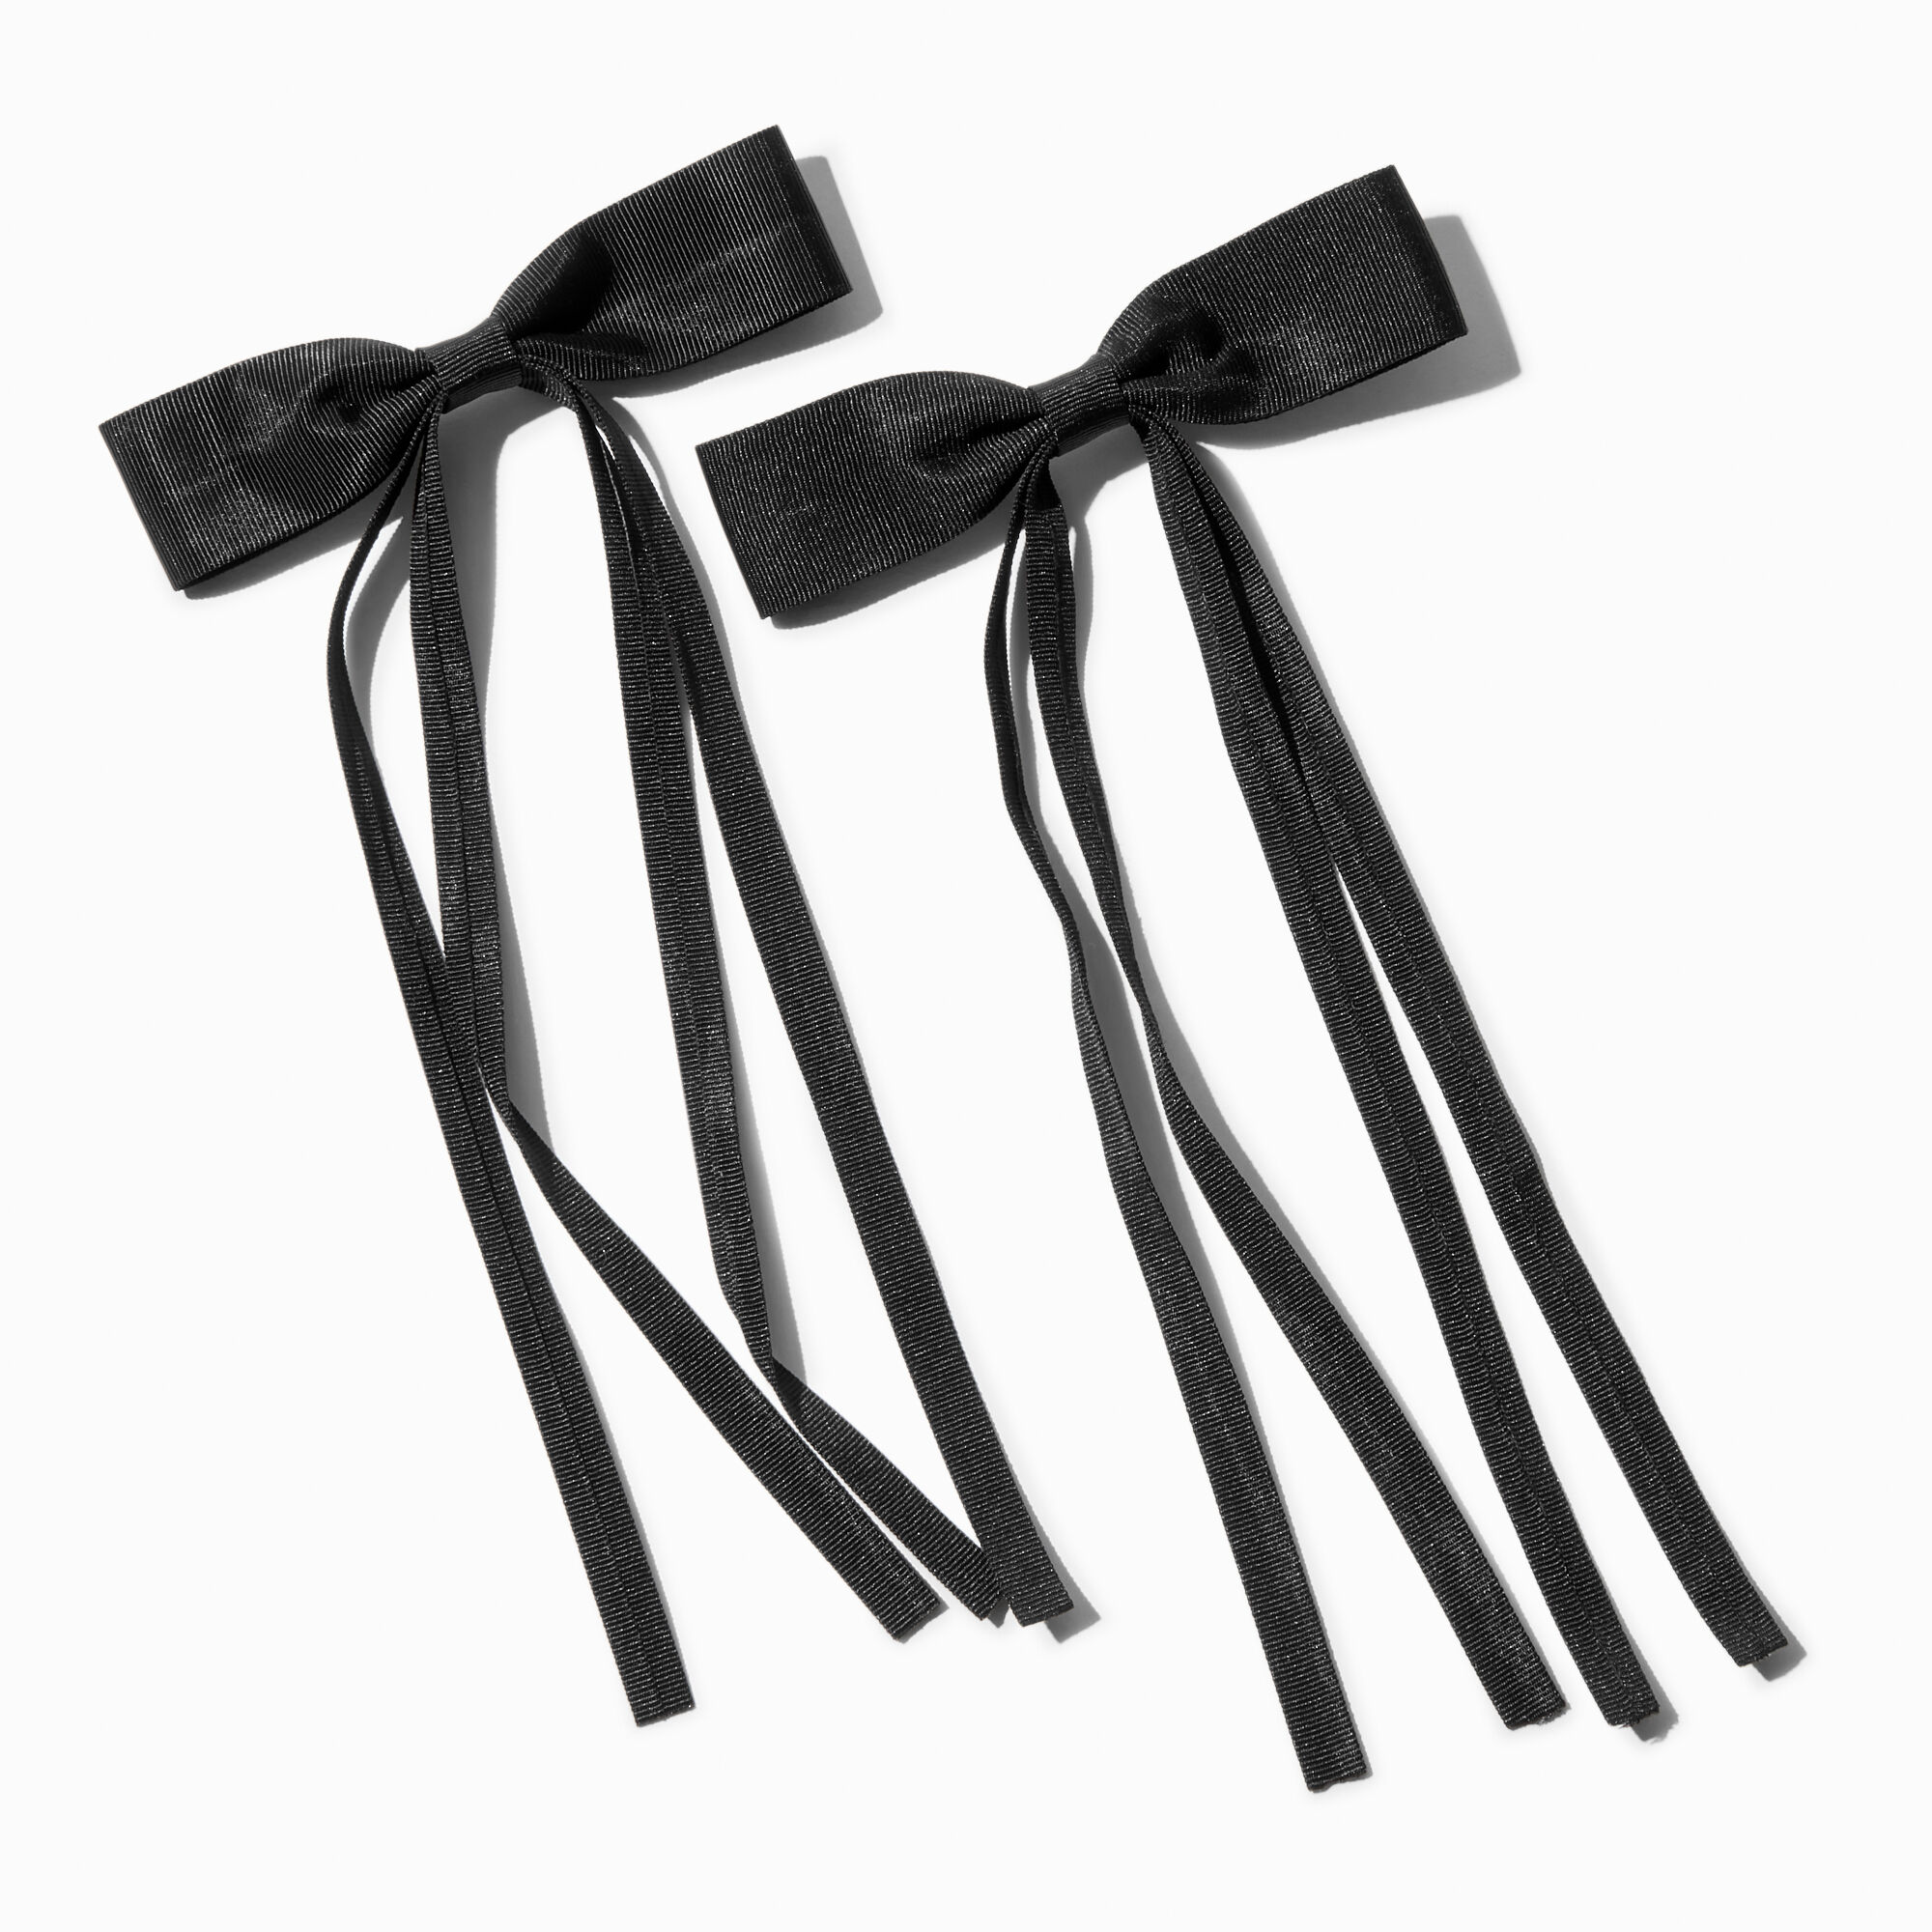 View Claires Grosgrain Ribbon Long Tail Hair Bow Clips 2 Pack Black information